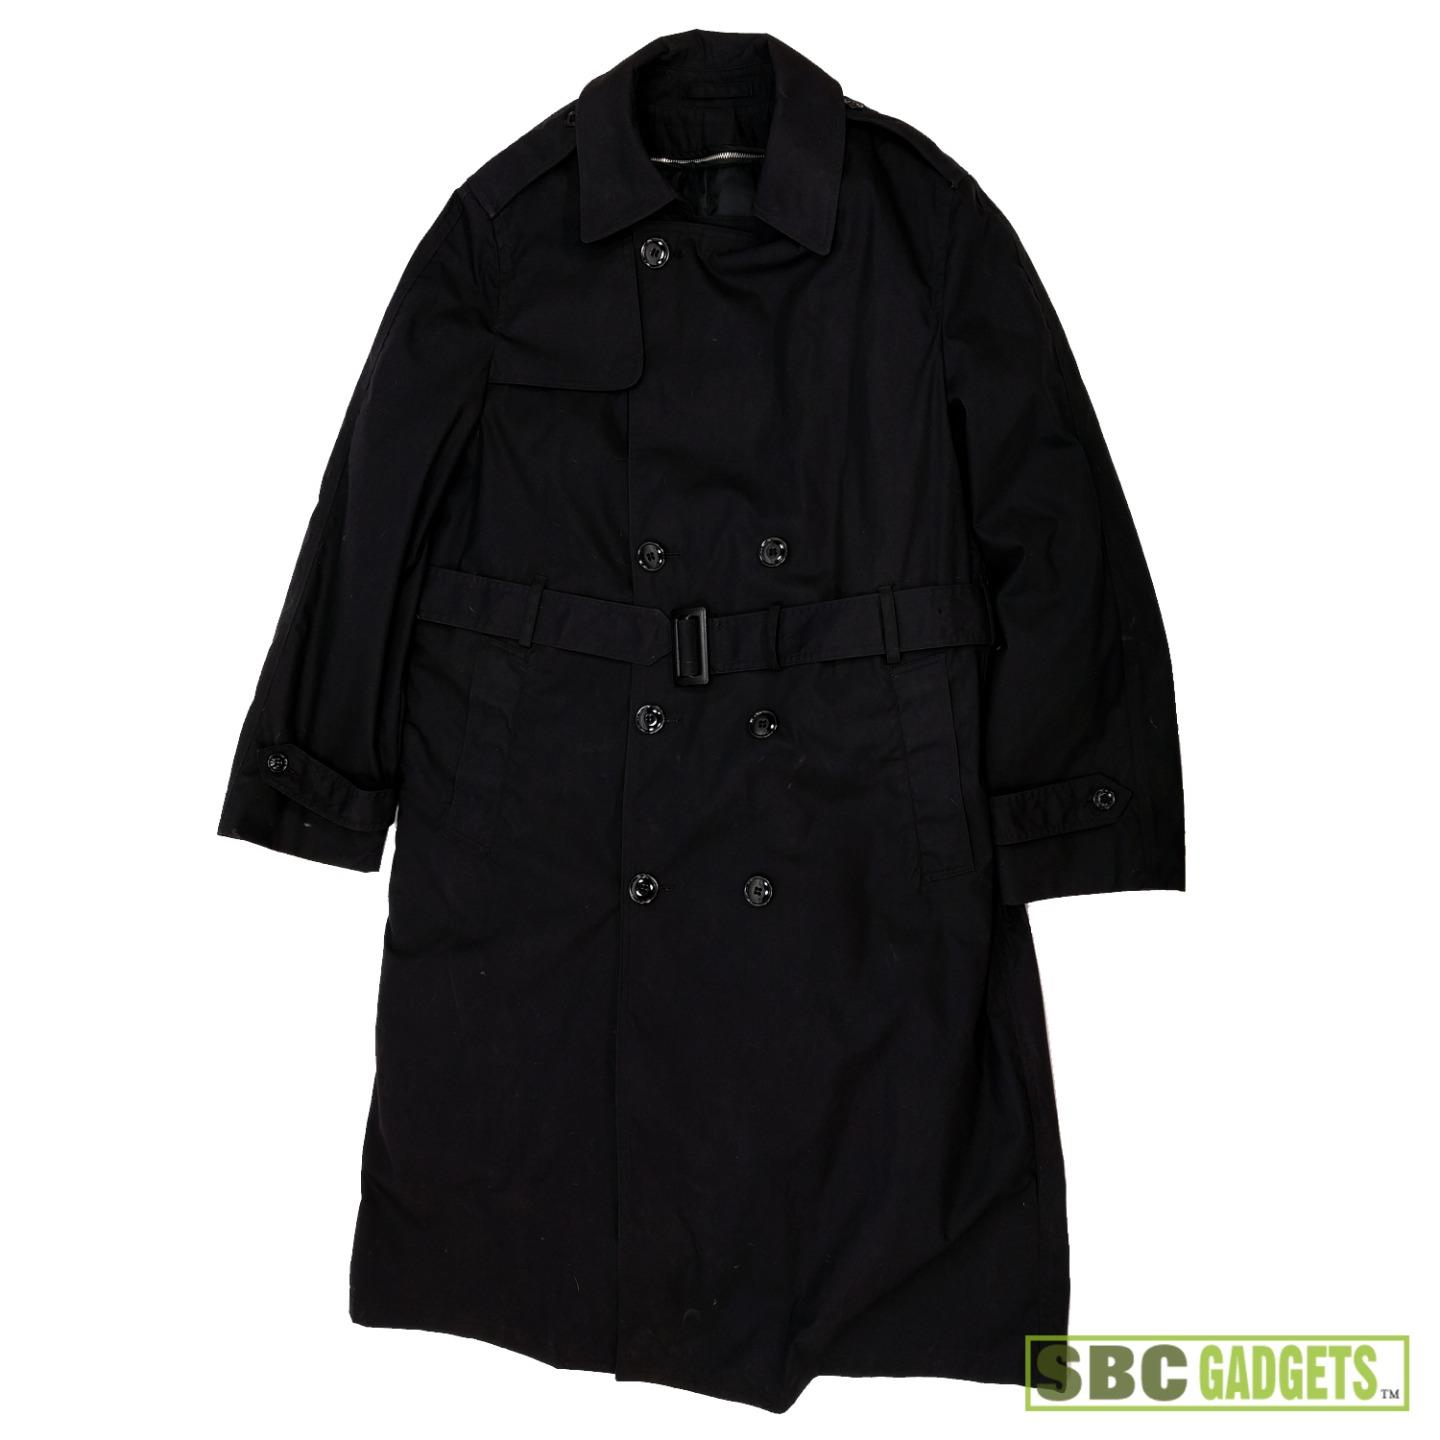 Army Men's Black All-Weather Trench Coat W/ Liner, Size: 40L (8405-01 ...